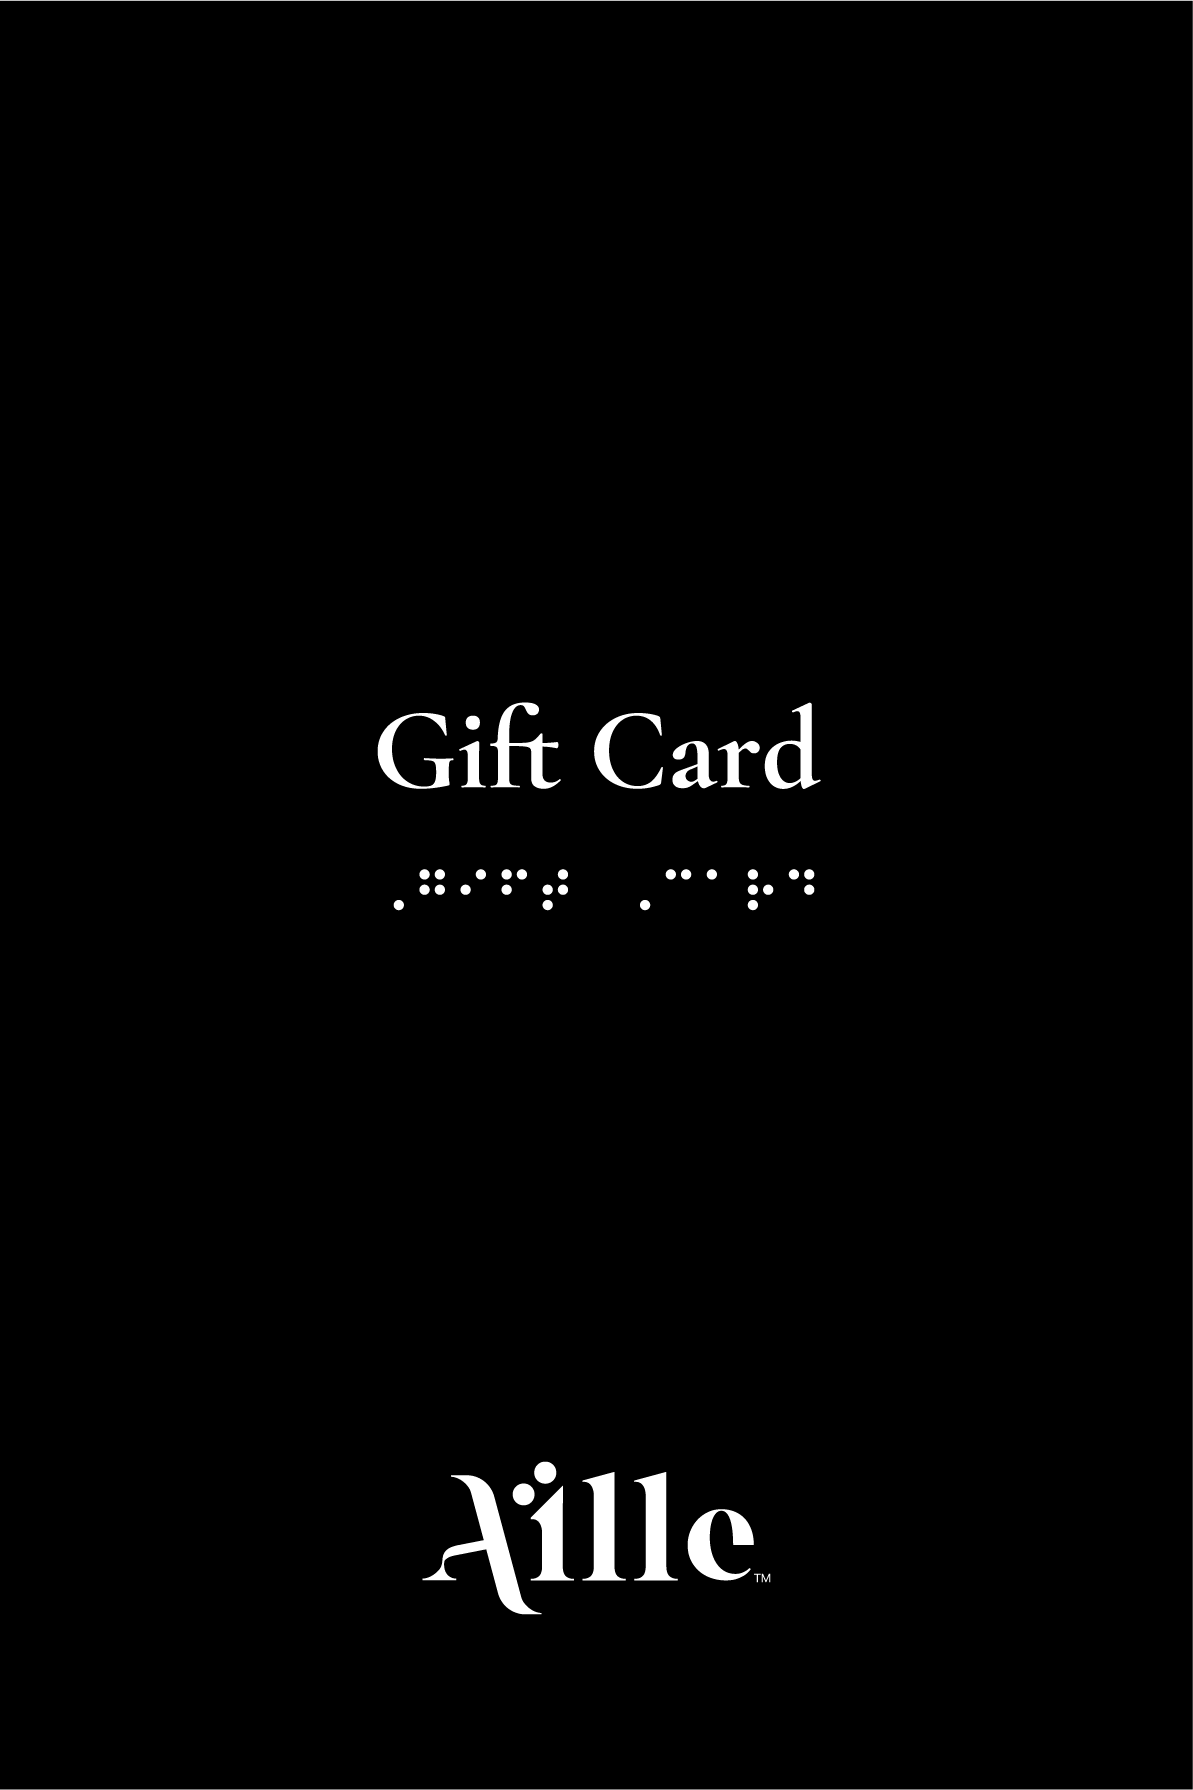 Black background with white text and simulated braille that reads "Gift Card"